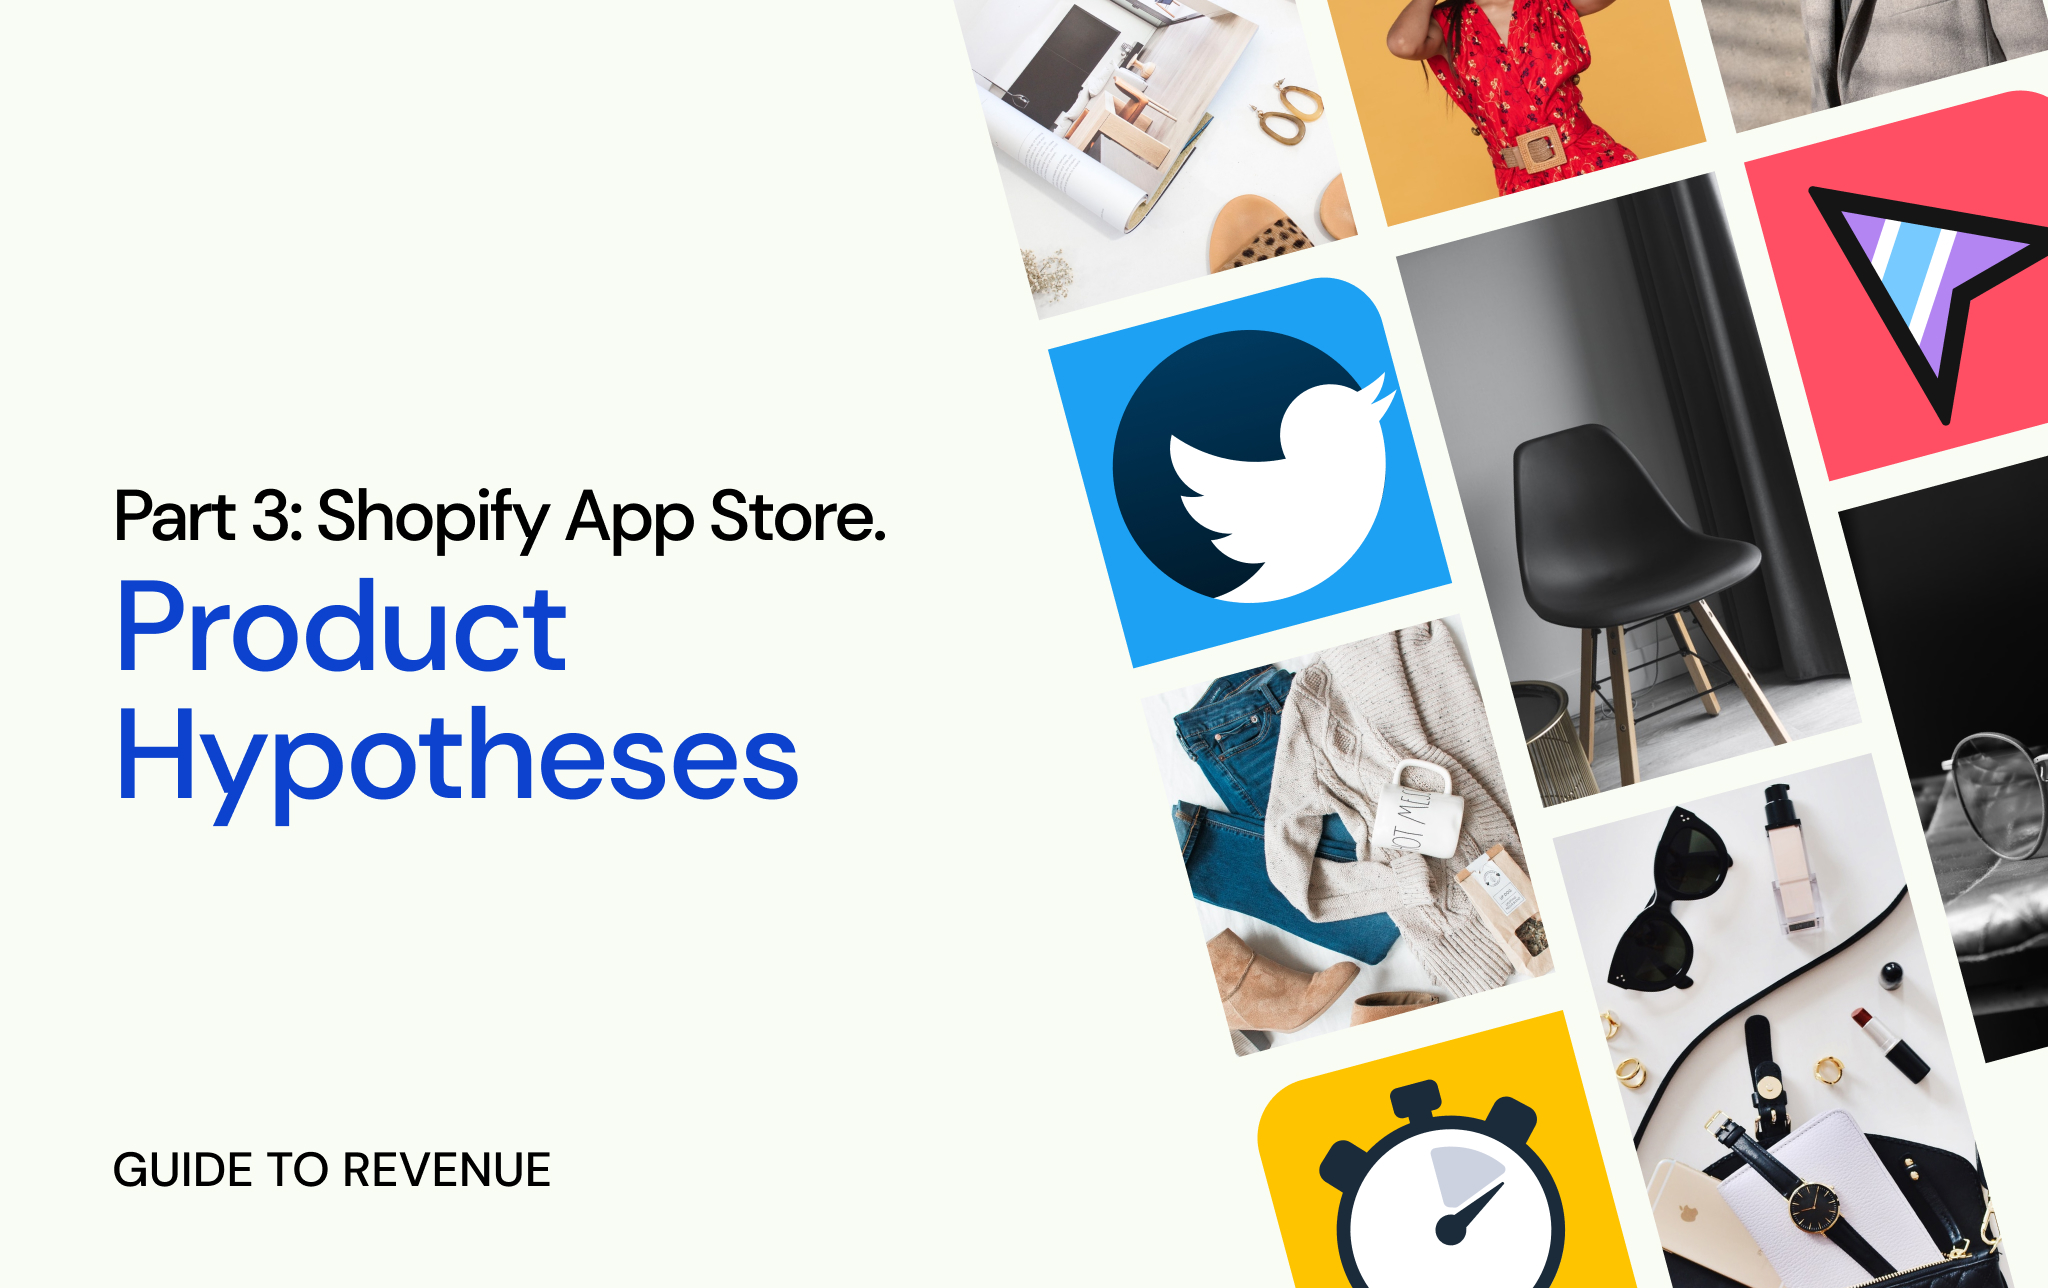 Shopify App Store. Guide to revenue. Product hypotheses